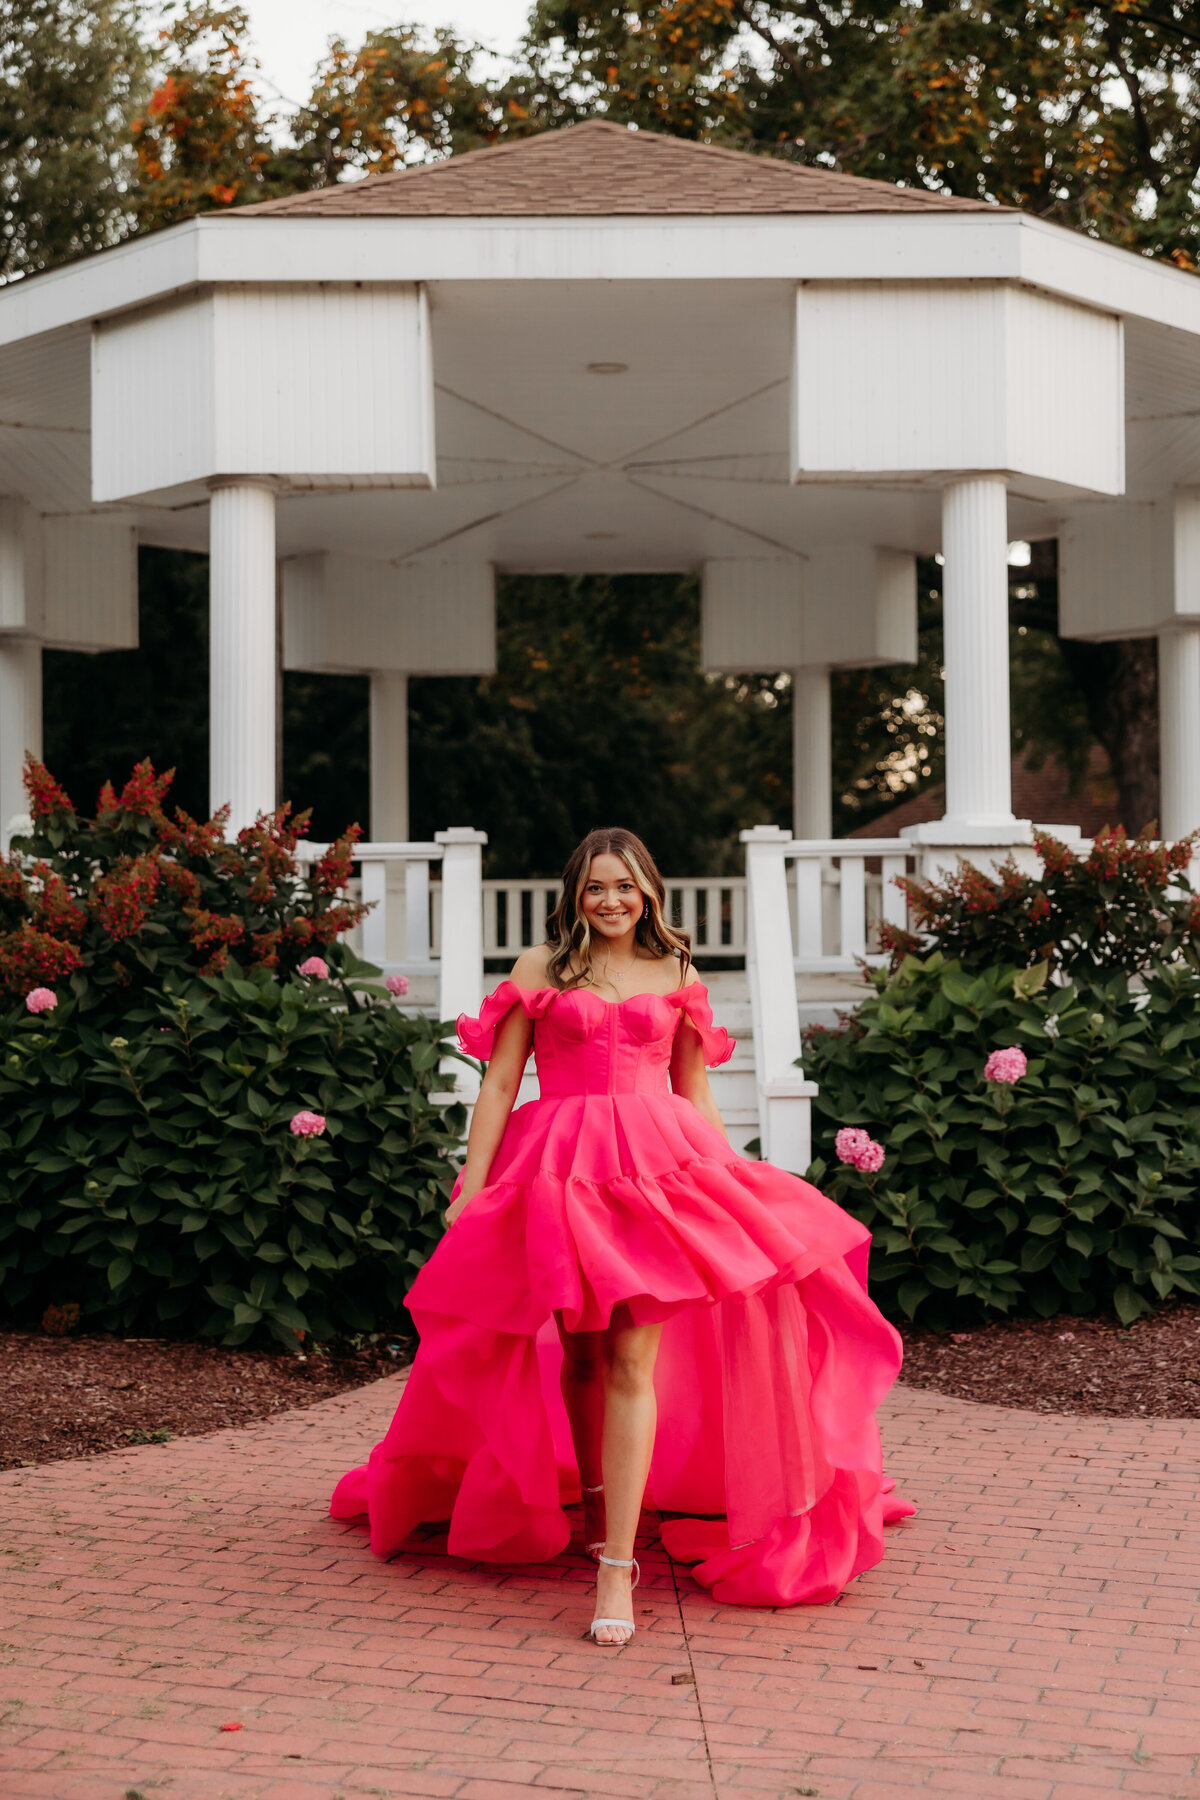 A girl in a hot pink dress does a runway walk in front of a gazebo.